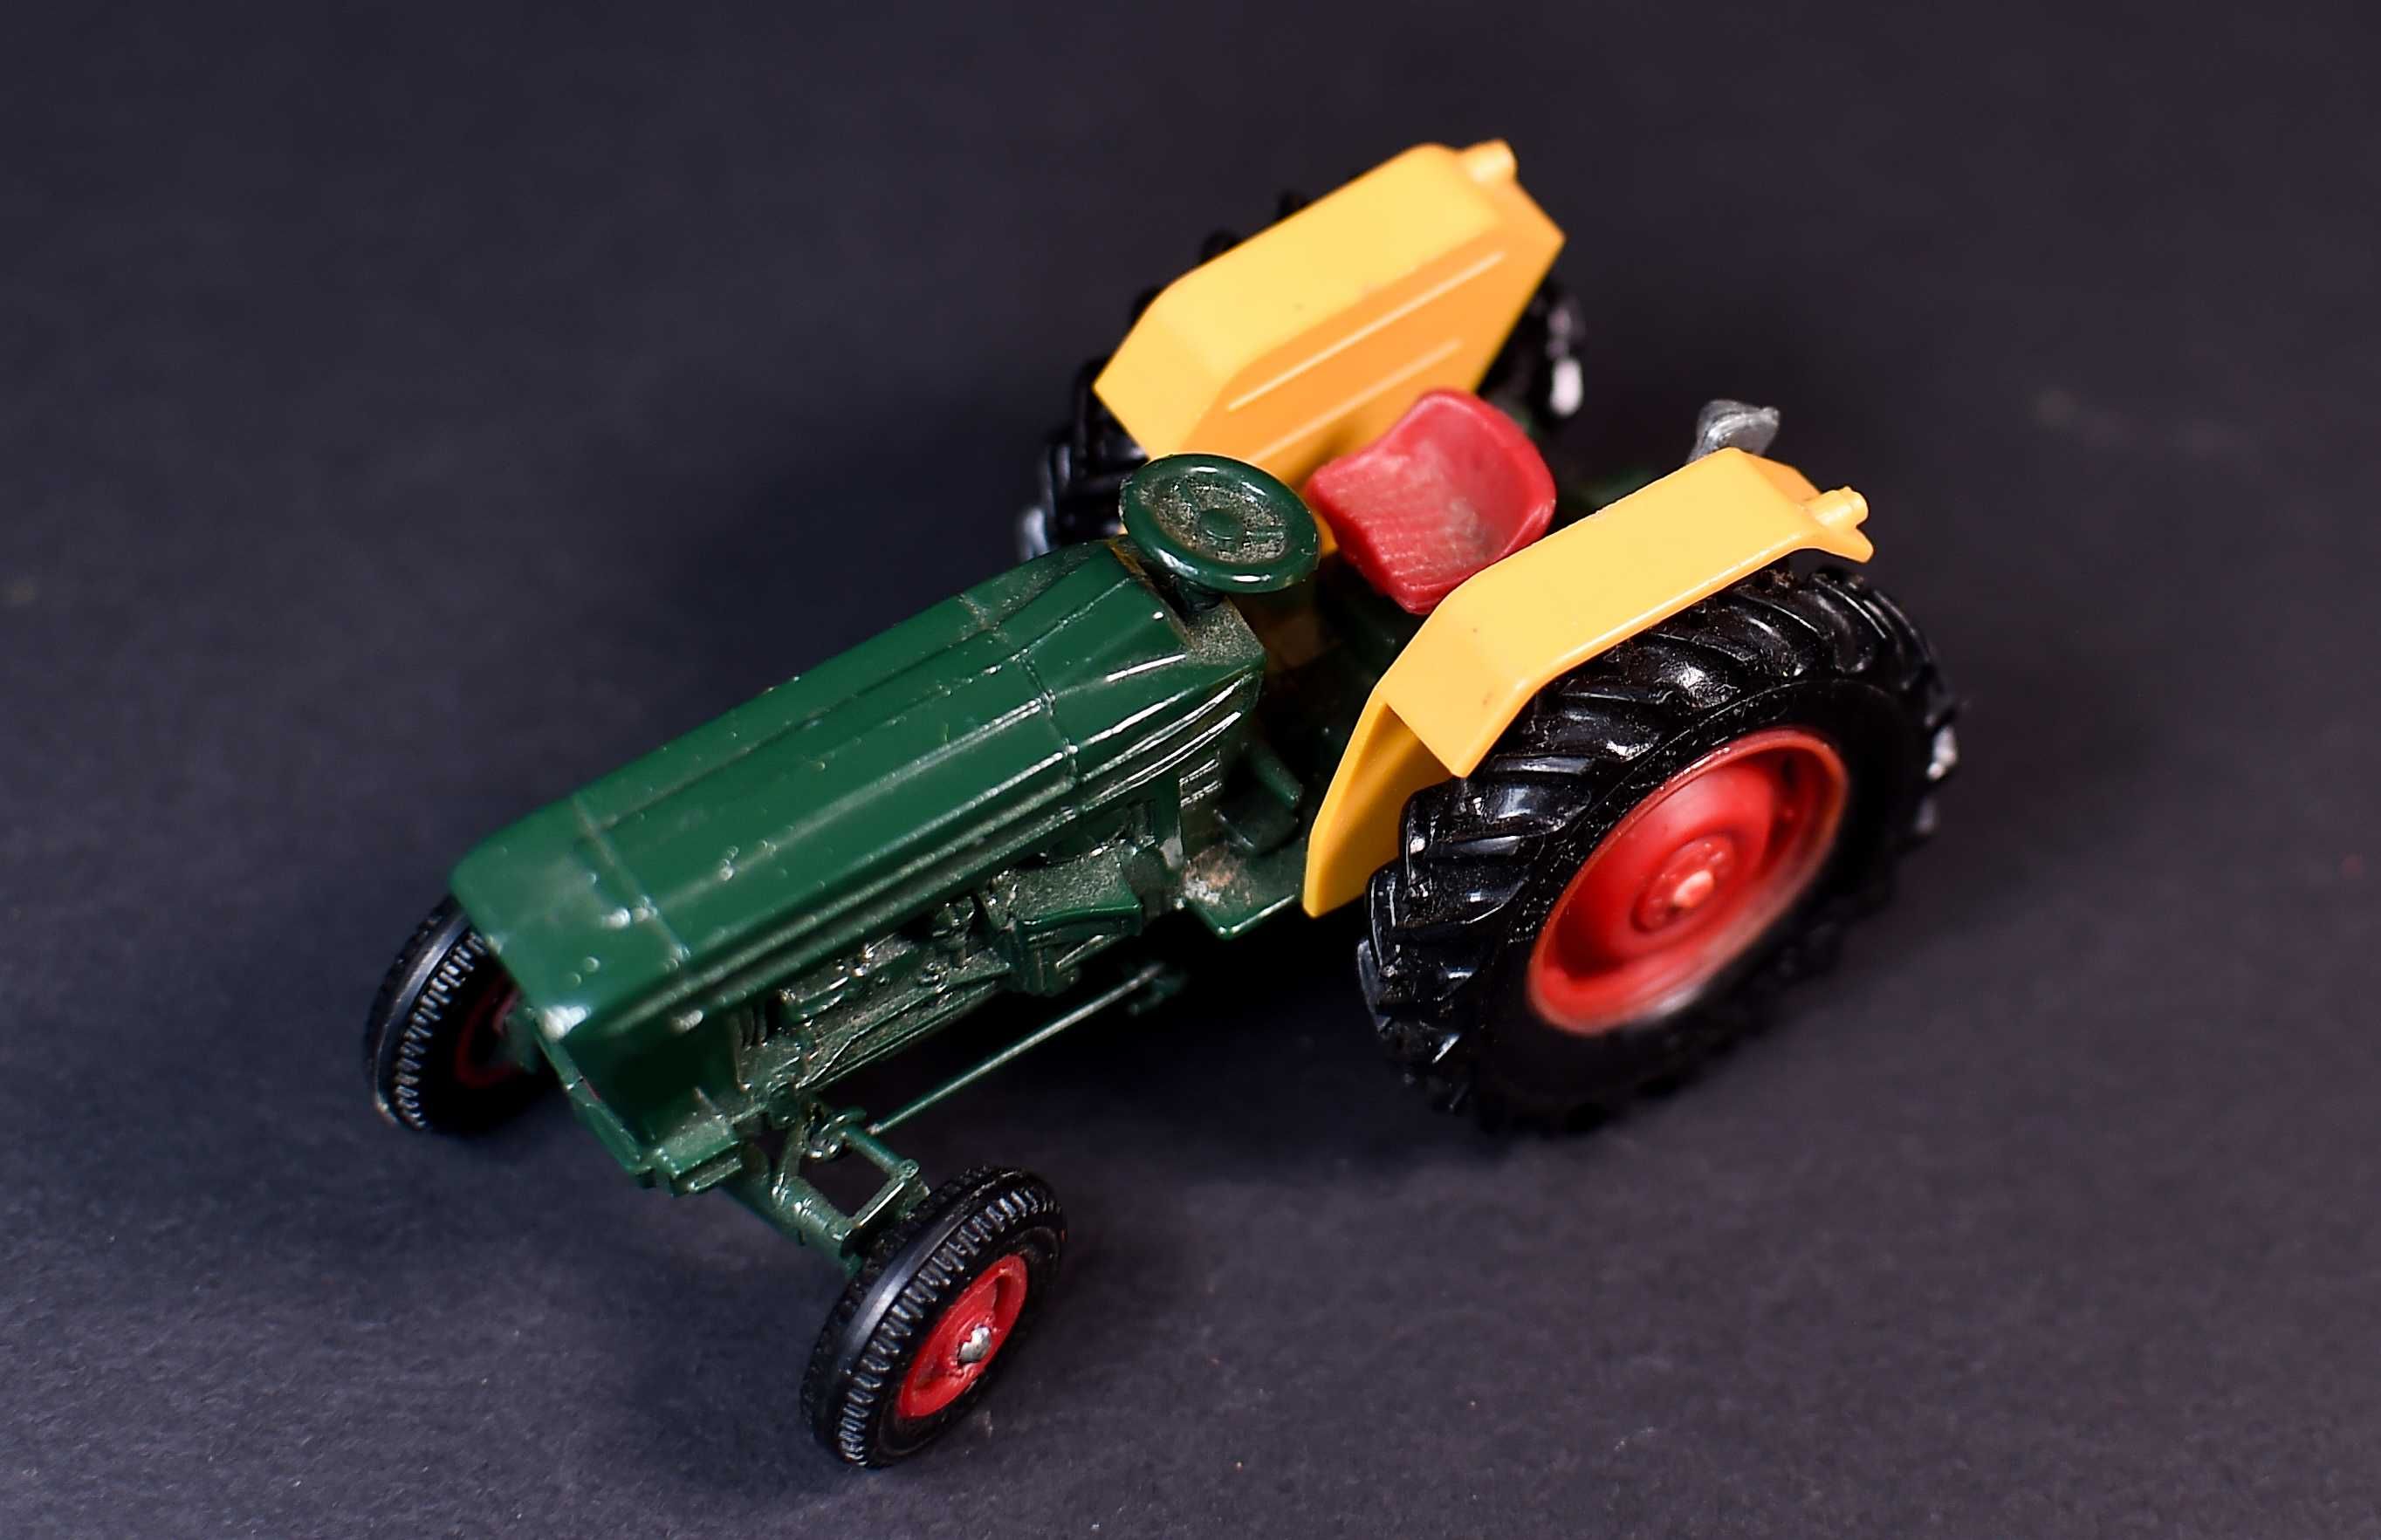 1/32 Ford 6600 (green body with yellow guards & red grill, Britains